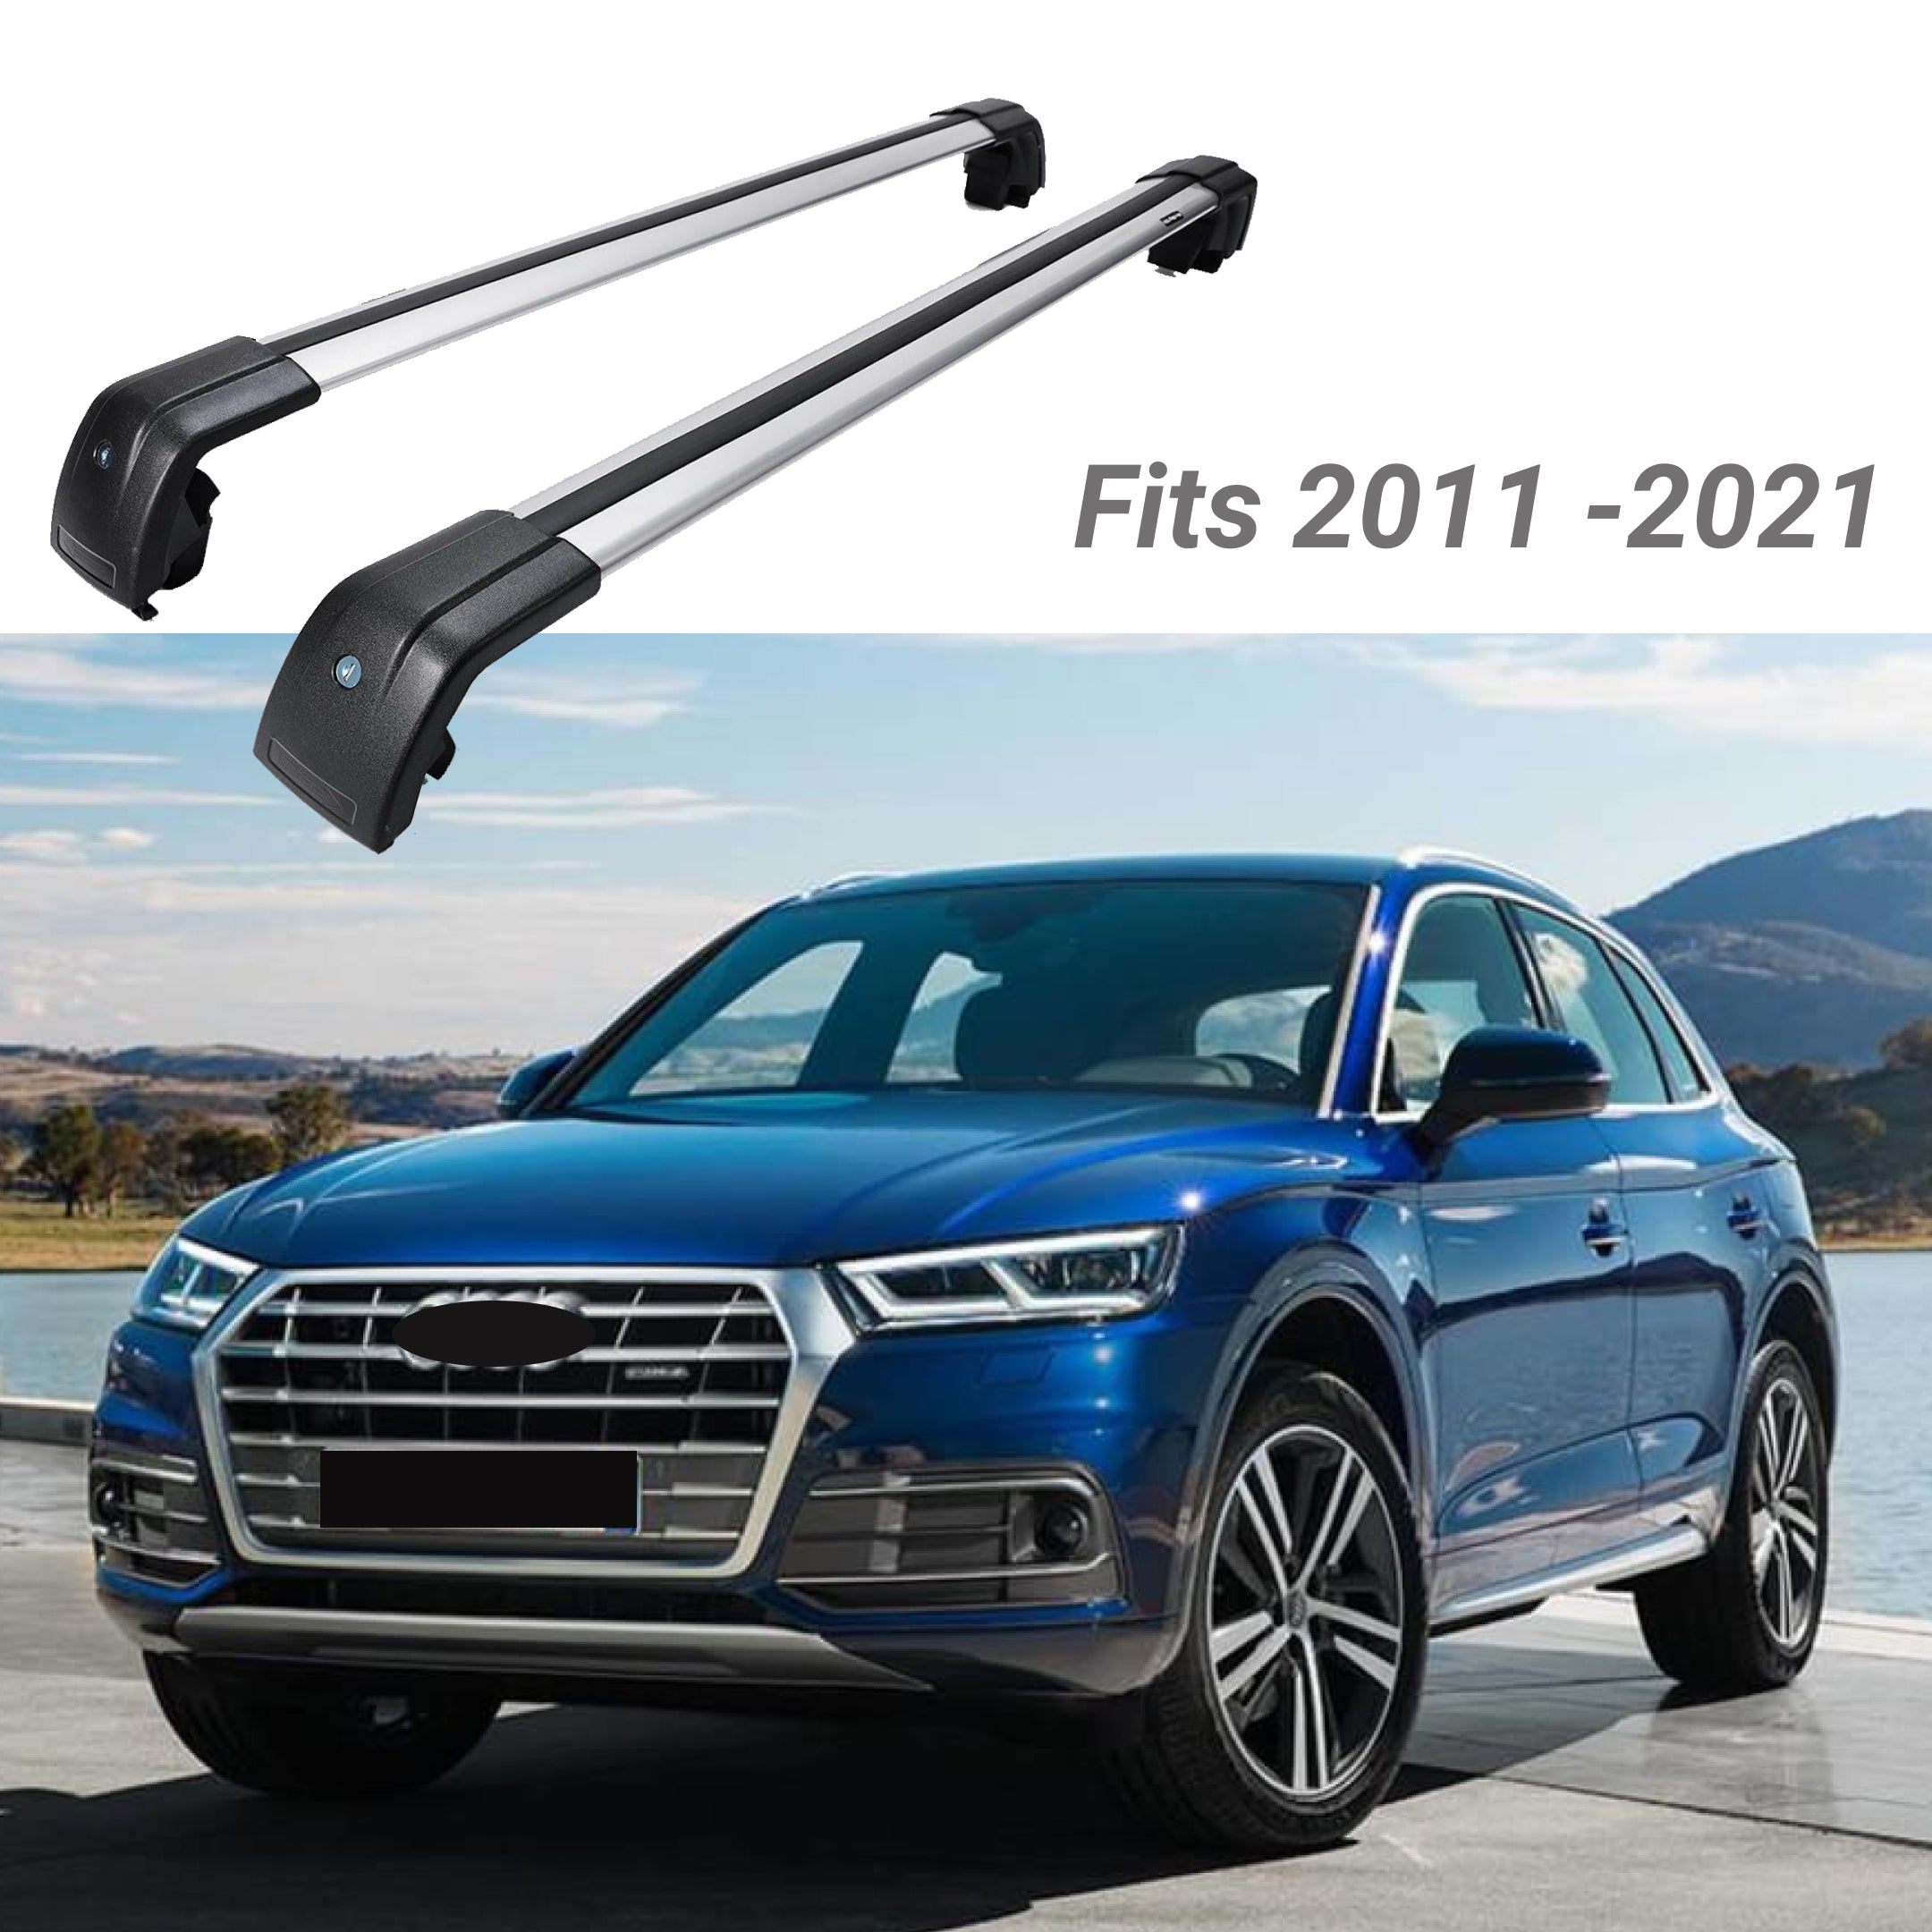 Fit 2011-2025 Audi Q5 SUV Top Roof Rack Cross Bar Baggage Luggage Carrier Bar - 0